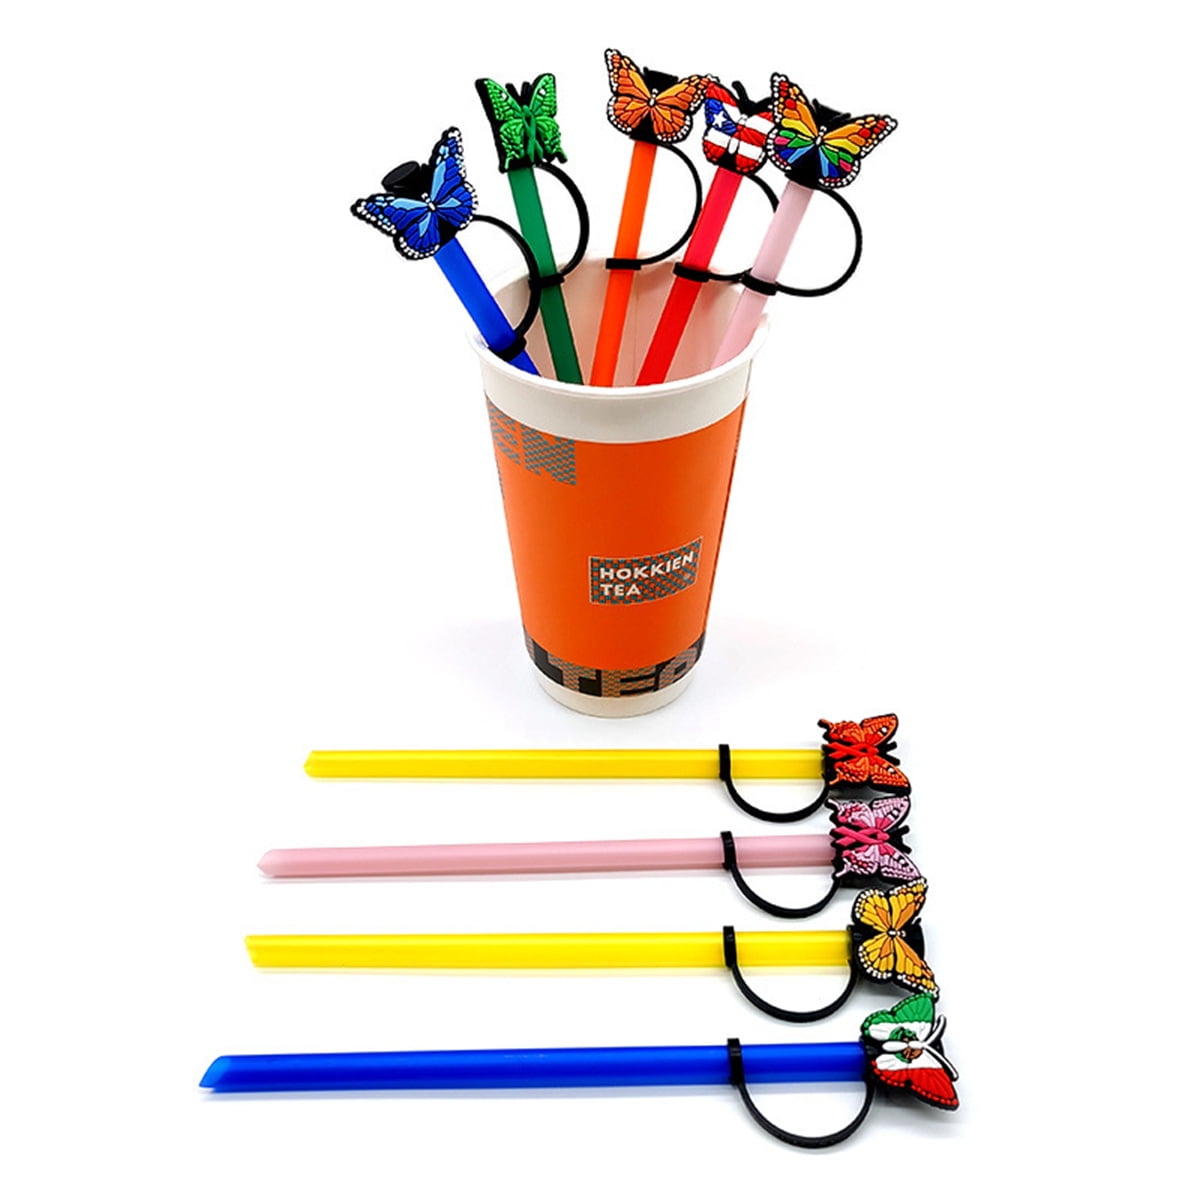 4/8pcs Straw Covers, Monkle Stanley Straw Topper Silicone Reusable  Dust-Proof Straw Tips 6-8mm For Drinking Straws Plug Straw Covers for  restaurants/c